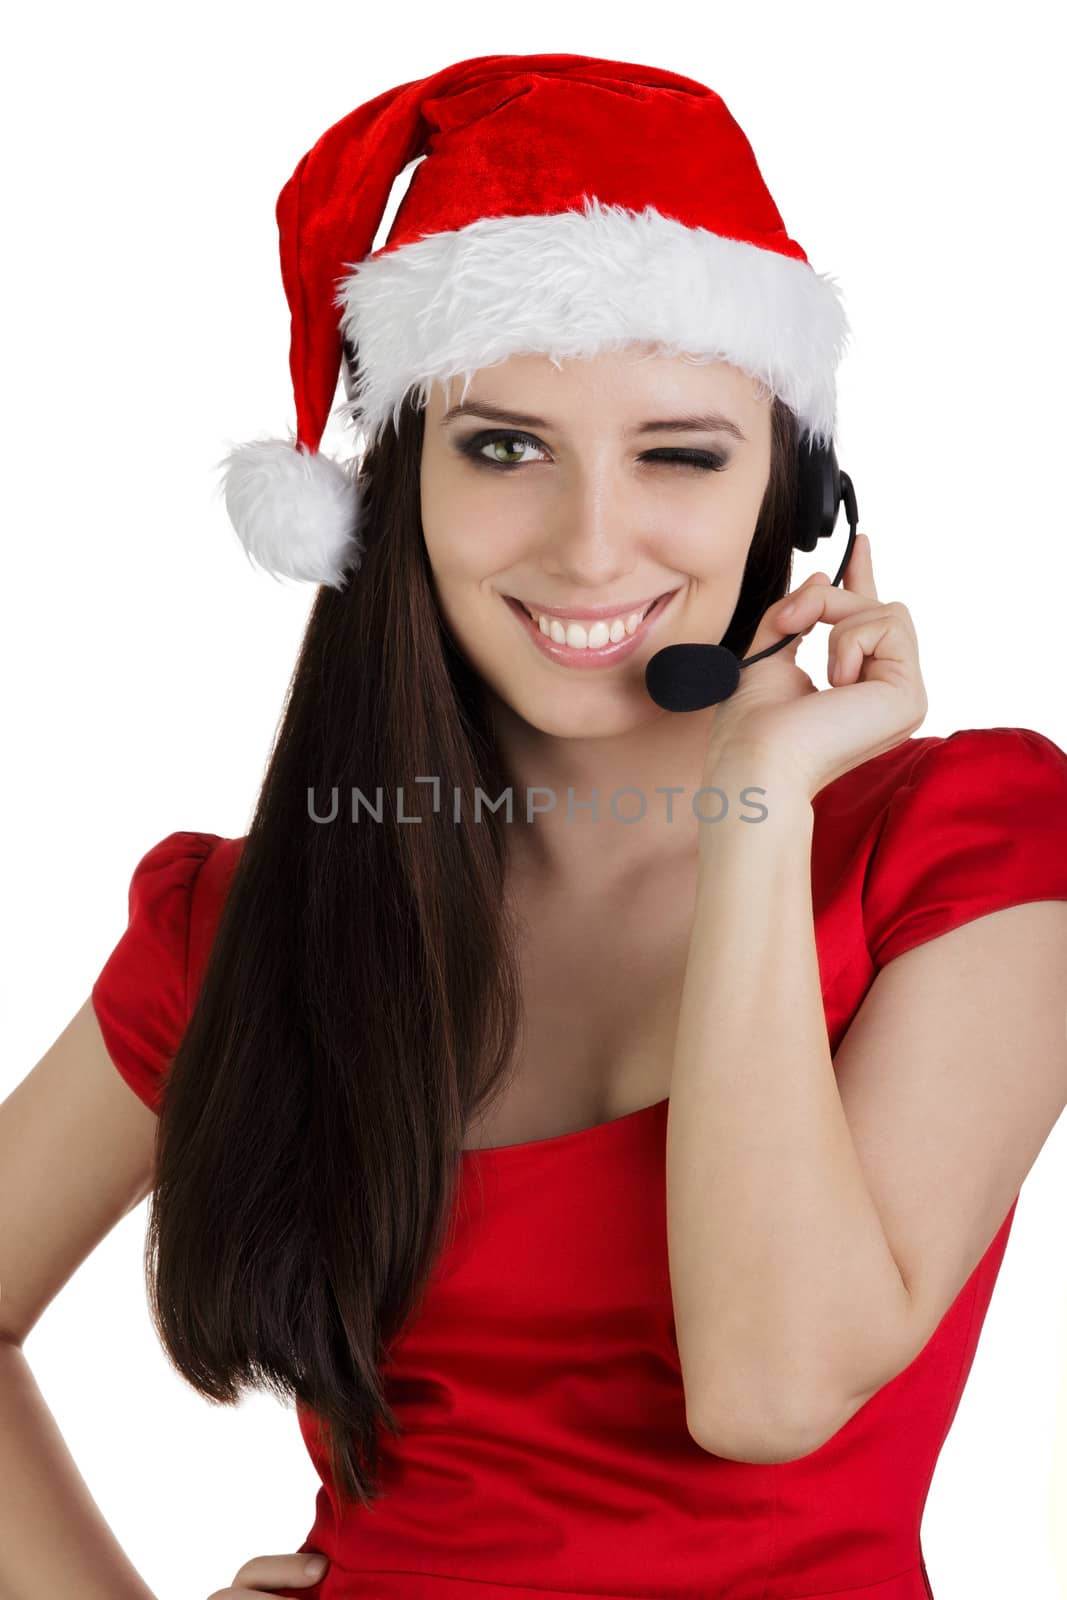 Christmas Call Center Girl by NicoletaIonescu